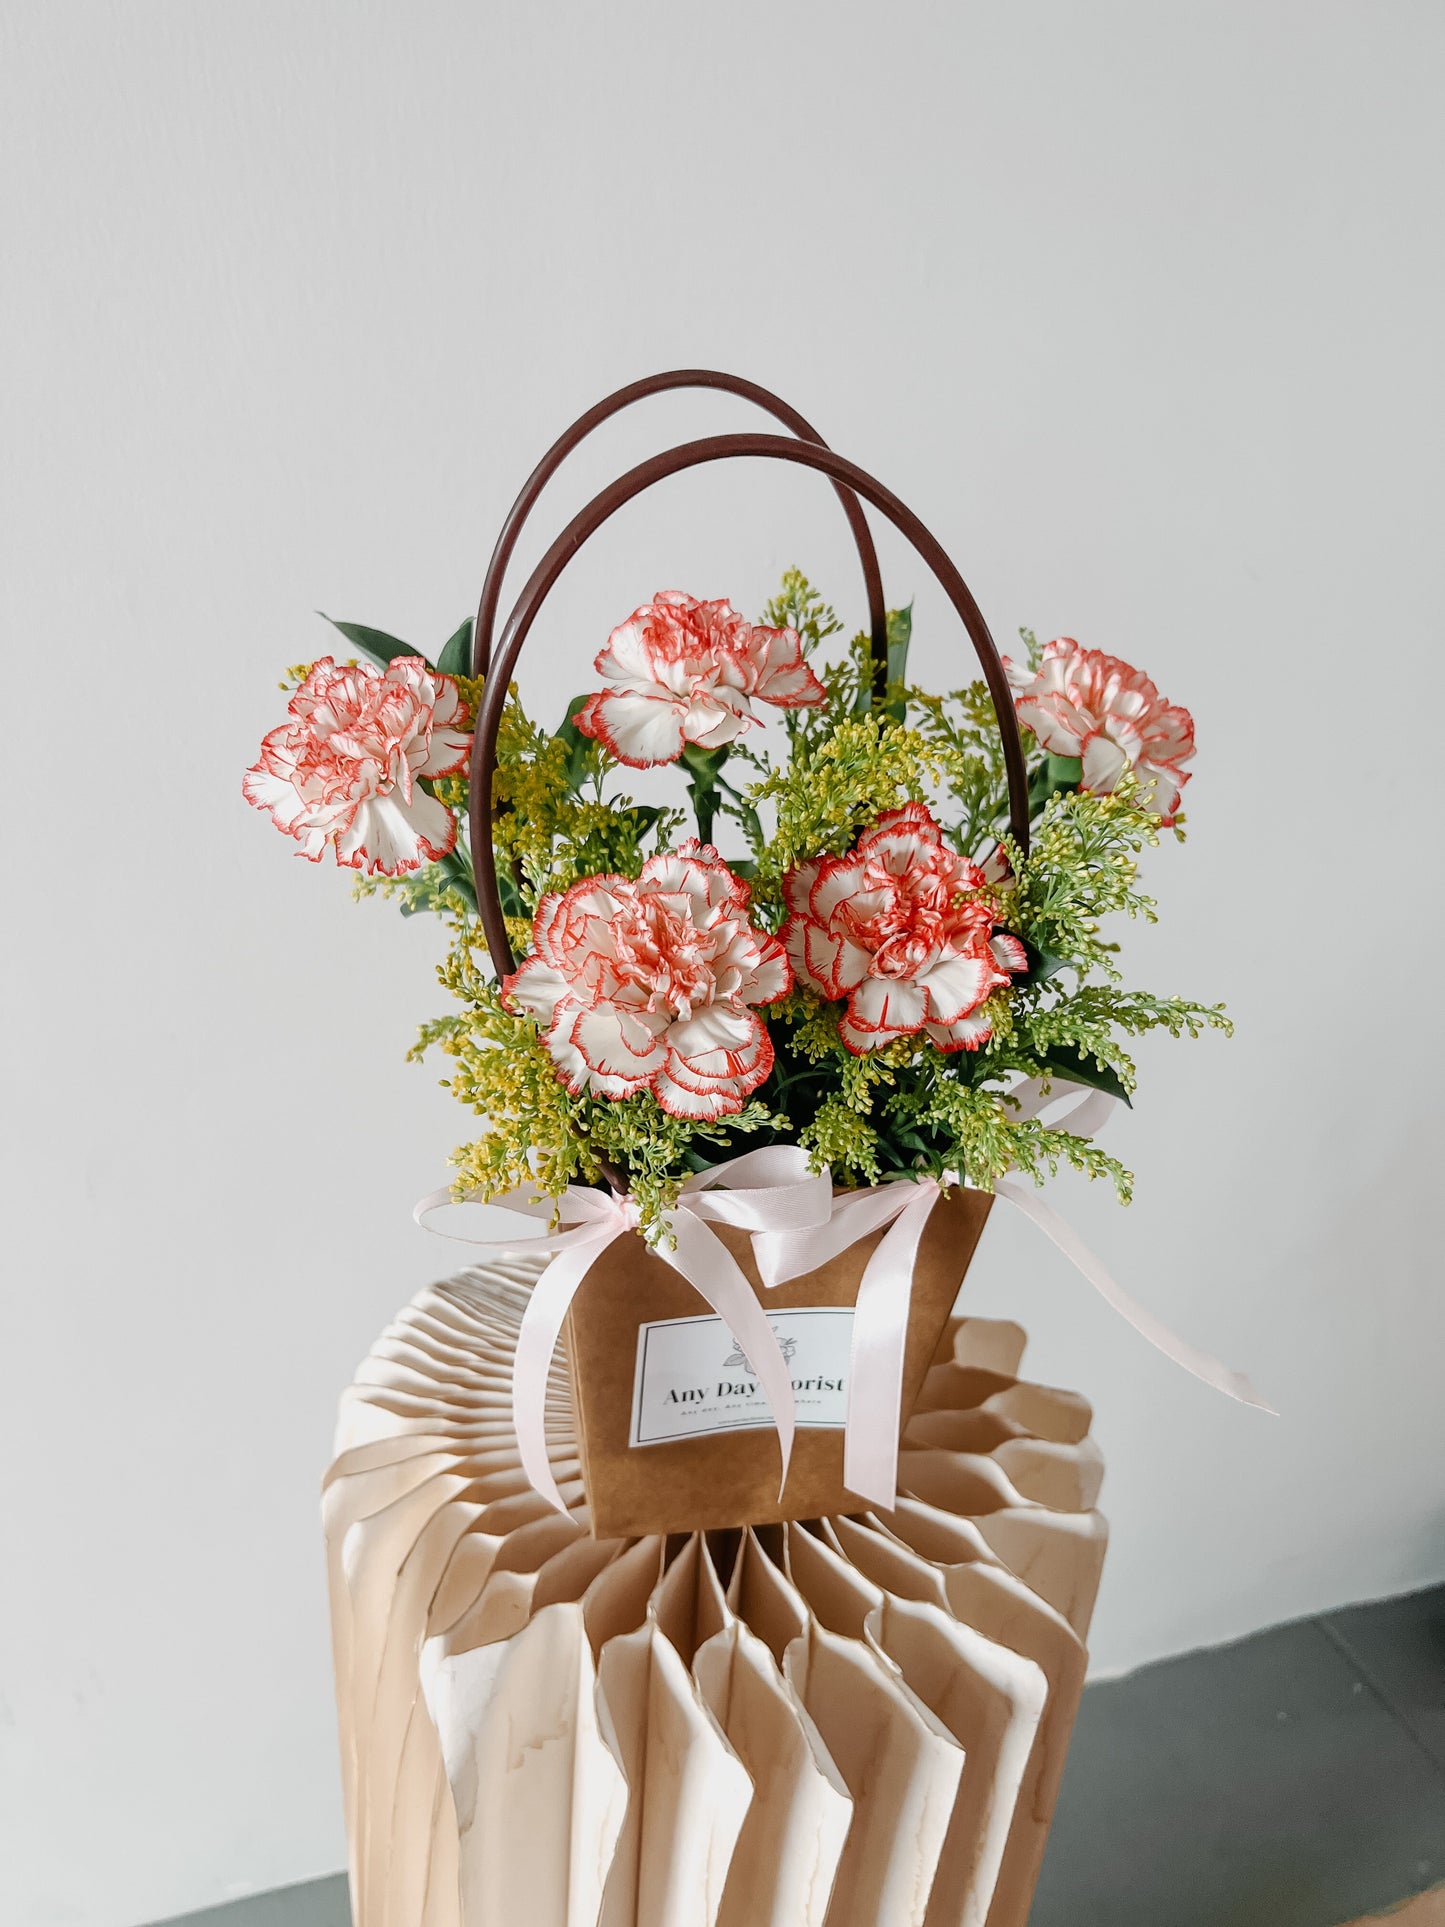 Any Day Florist
Keep your flowers fresh with a Carnation Solidago Bloom Bag!  This unique carnation solid ago bloom bag is perfect for any occasion. It is a great way to show off y[VD04] Carnation Solidago Bloom Bag